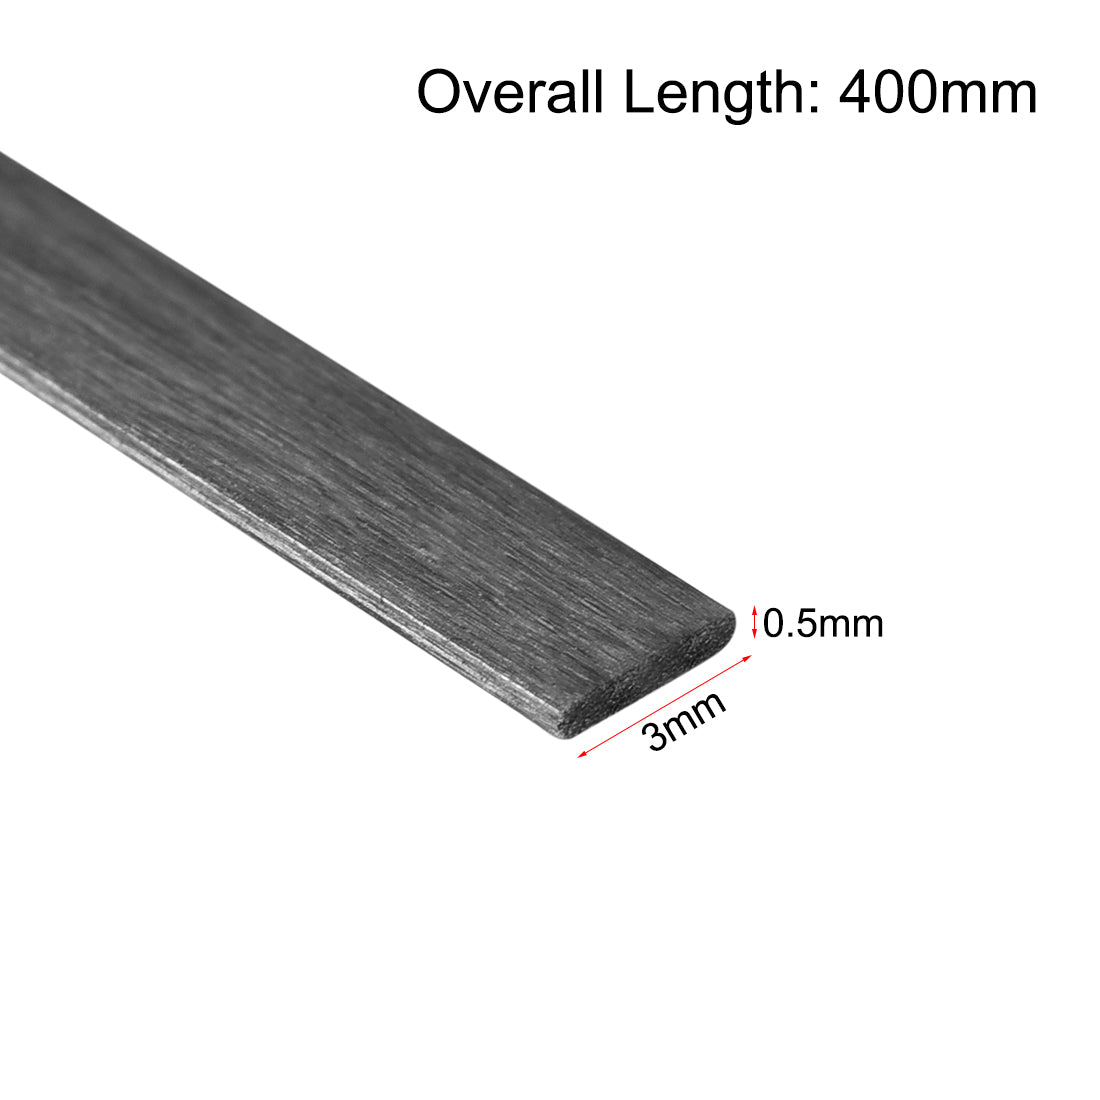 uxcell Uxcell Carbon Fiber Strip Bars 0.5x3mm 400mm Length Pultruded Carbon Fiber Strips for Kites, RC Airplane 1 Pcs